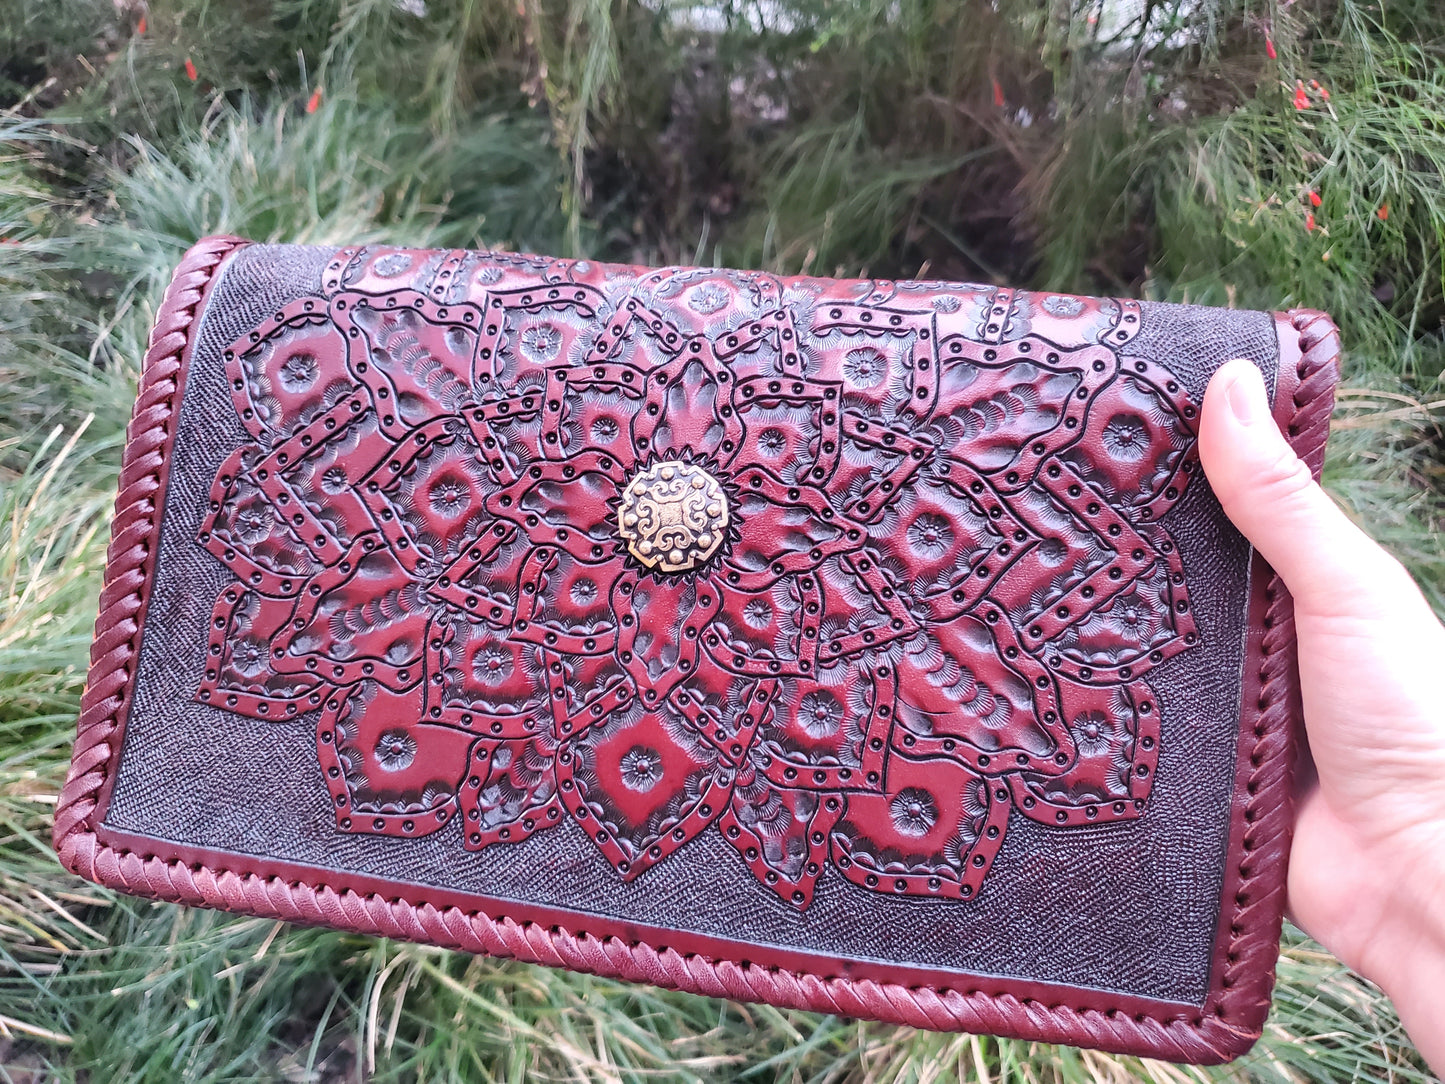 Hand Made Leather Crossbody Bag "CECELIA" by MIOHERMOSA Brown Cecilia Mayan Middle